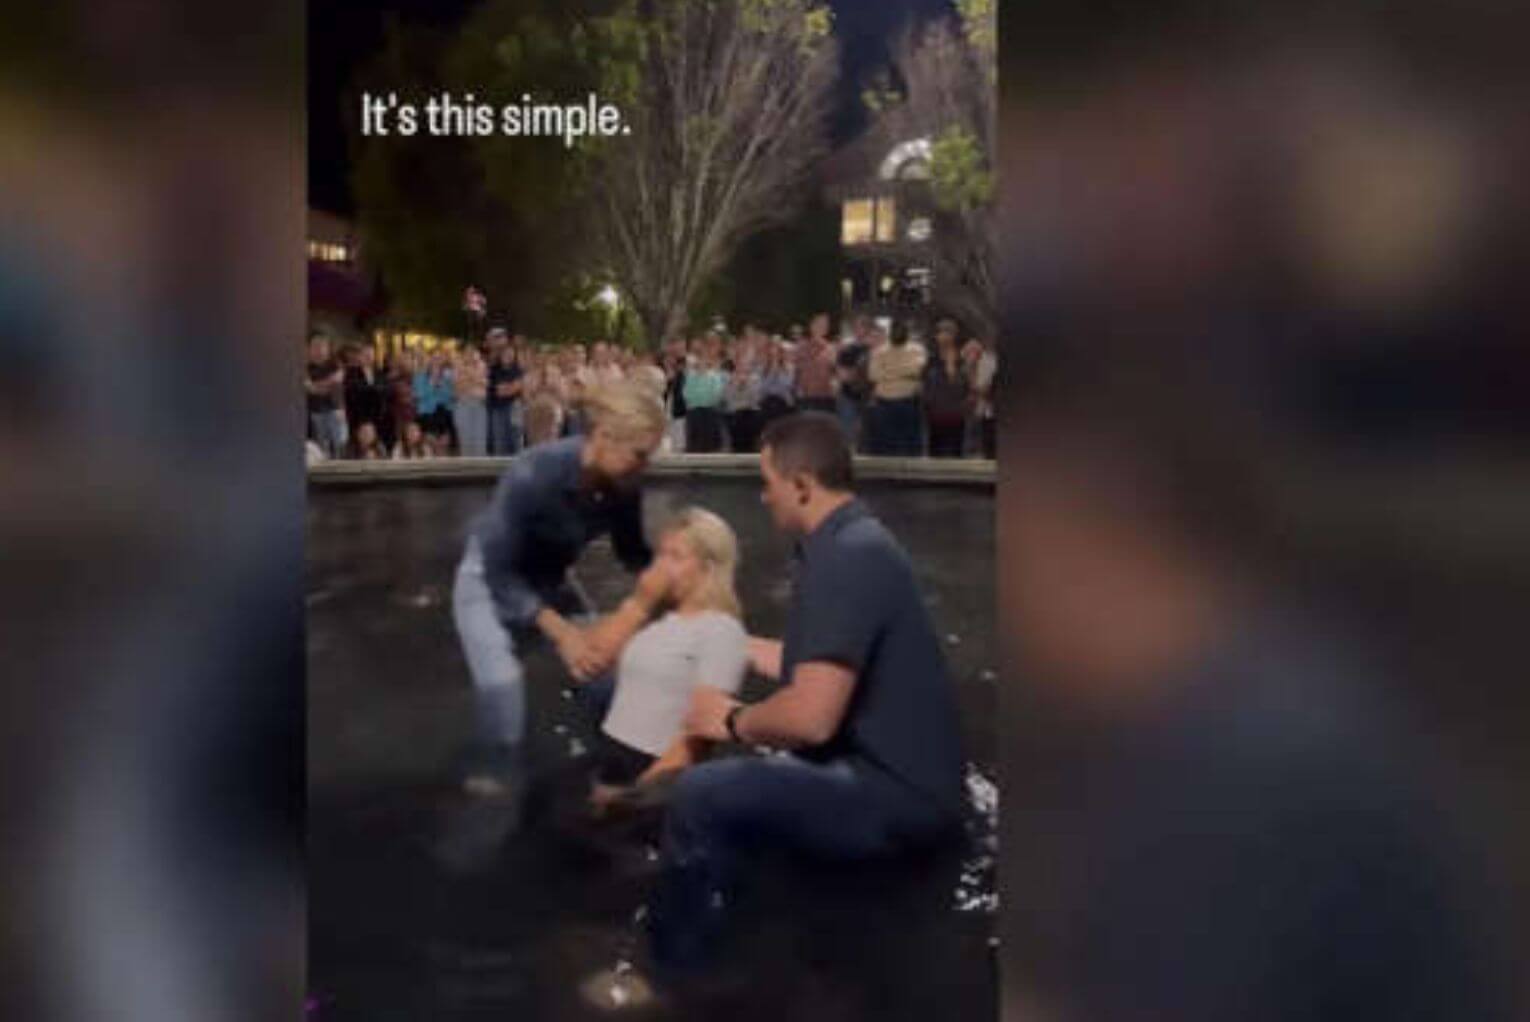 ‘It Happened Again!’ Hundreds Baptized in Latest Campus Revival, Now at University of Alabama